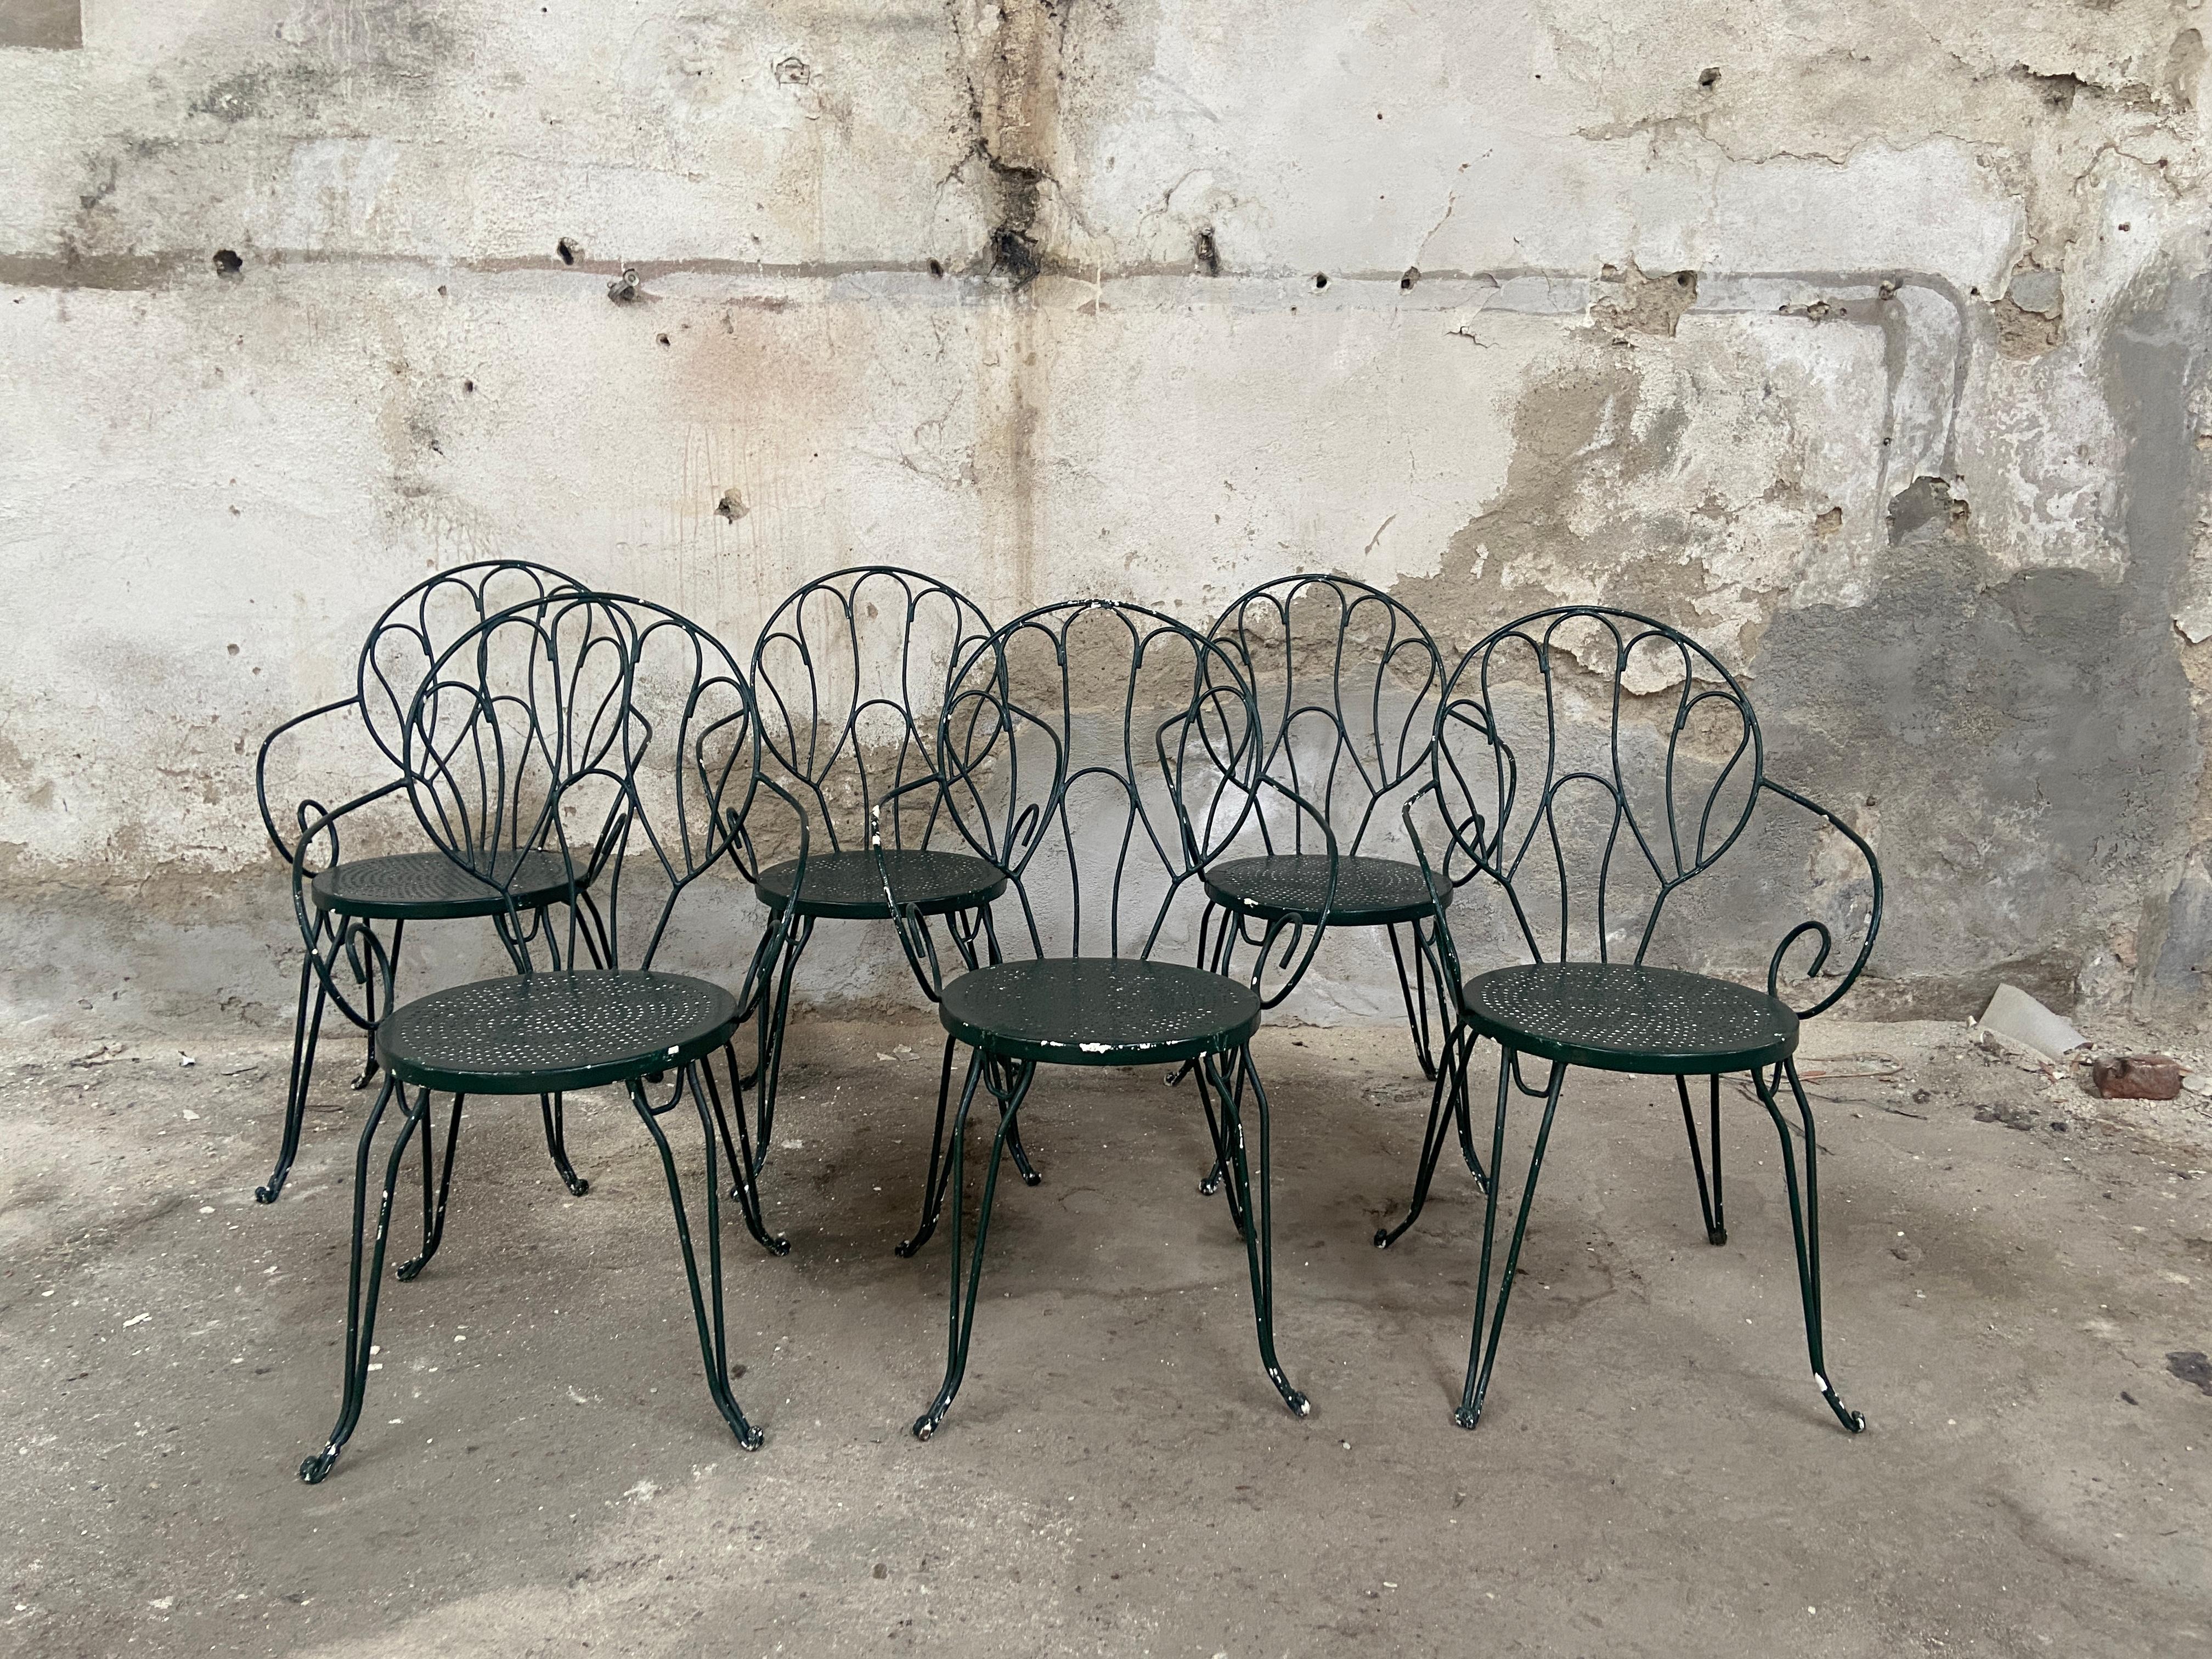 Mid-Century Modern Italian set of 6 iron garden or terrace chairs, green painted from 1960s
The chairs are in absolutely good vintage condition with very solid structure. The color needs to be repainted in some places. Quote for lacquering the